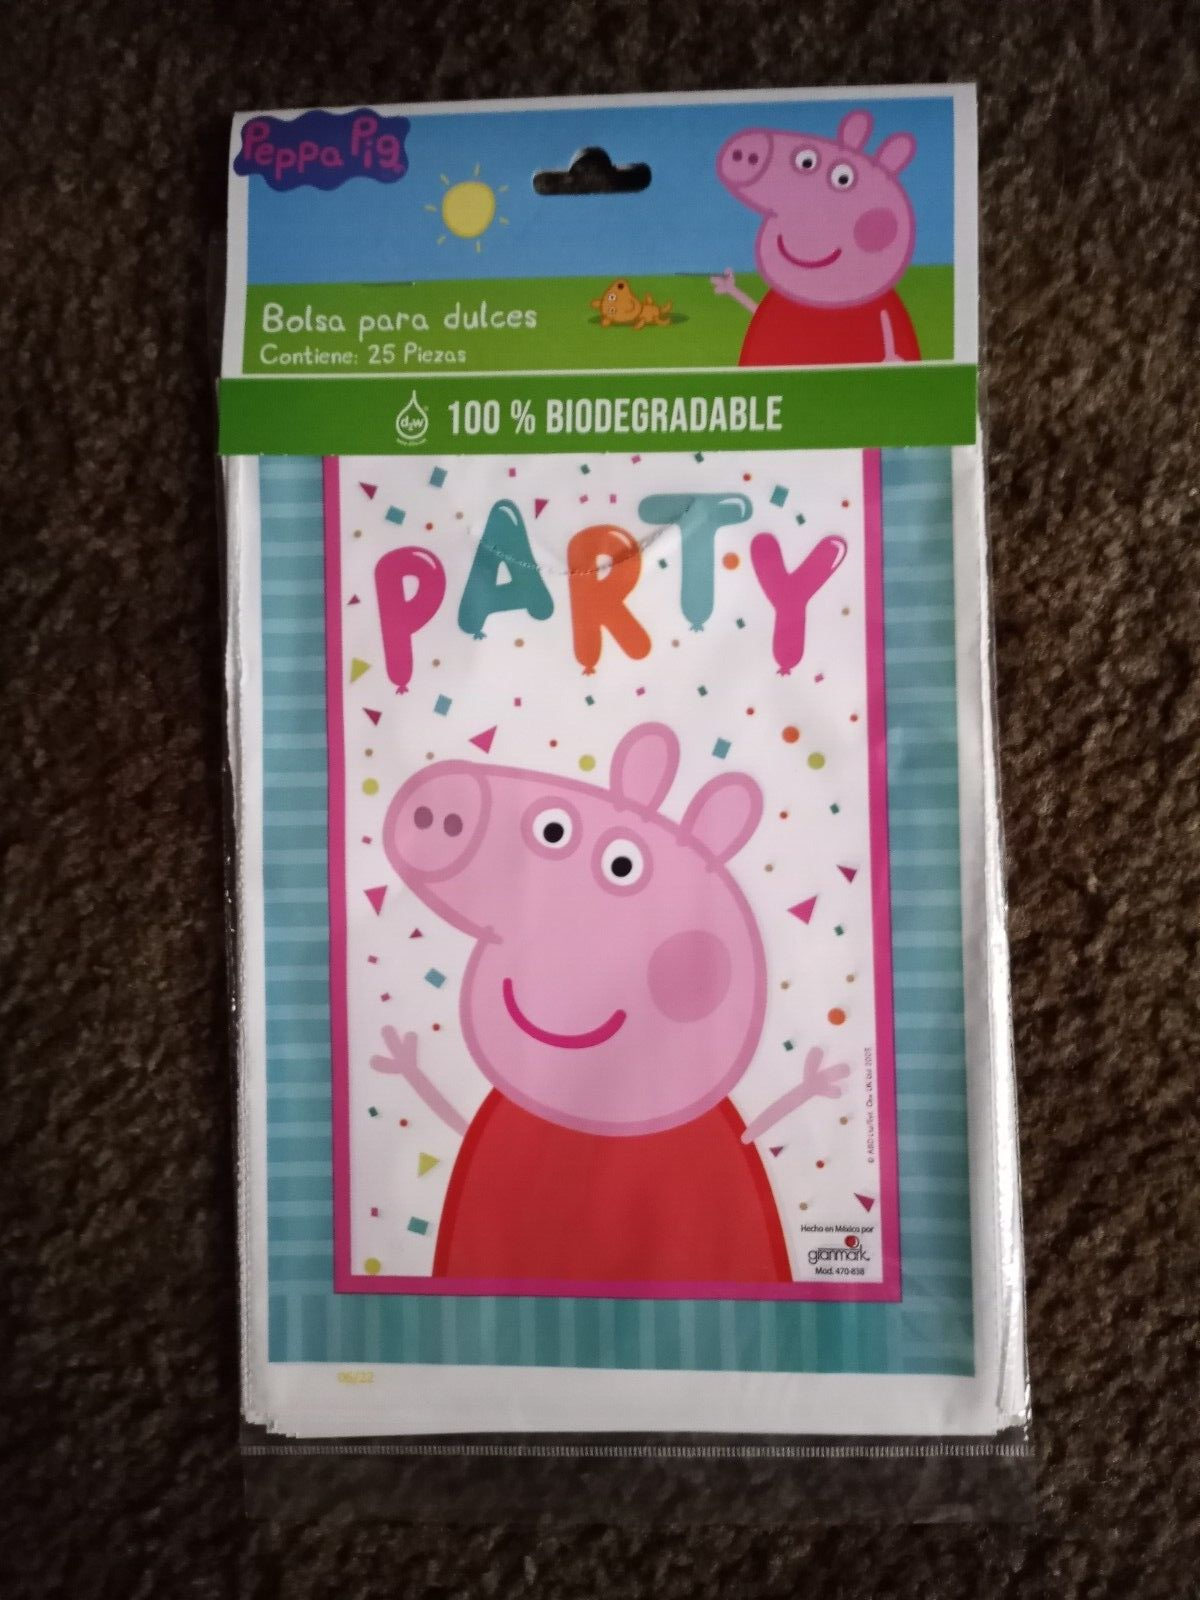 25 pcs Peppa Pig Birthday Party bags Favors Treat Candy Bags - $11.14